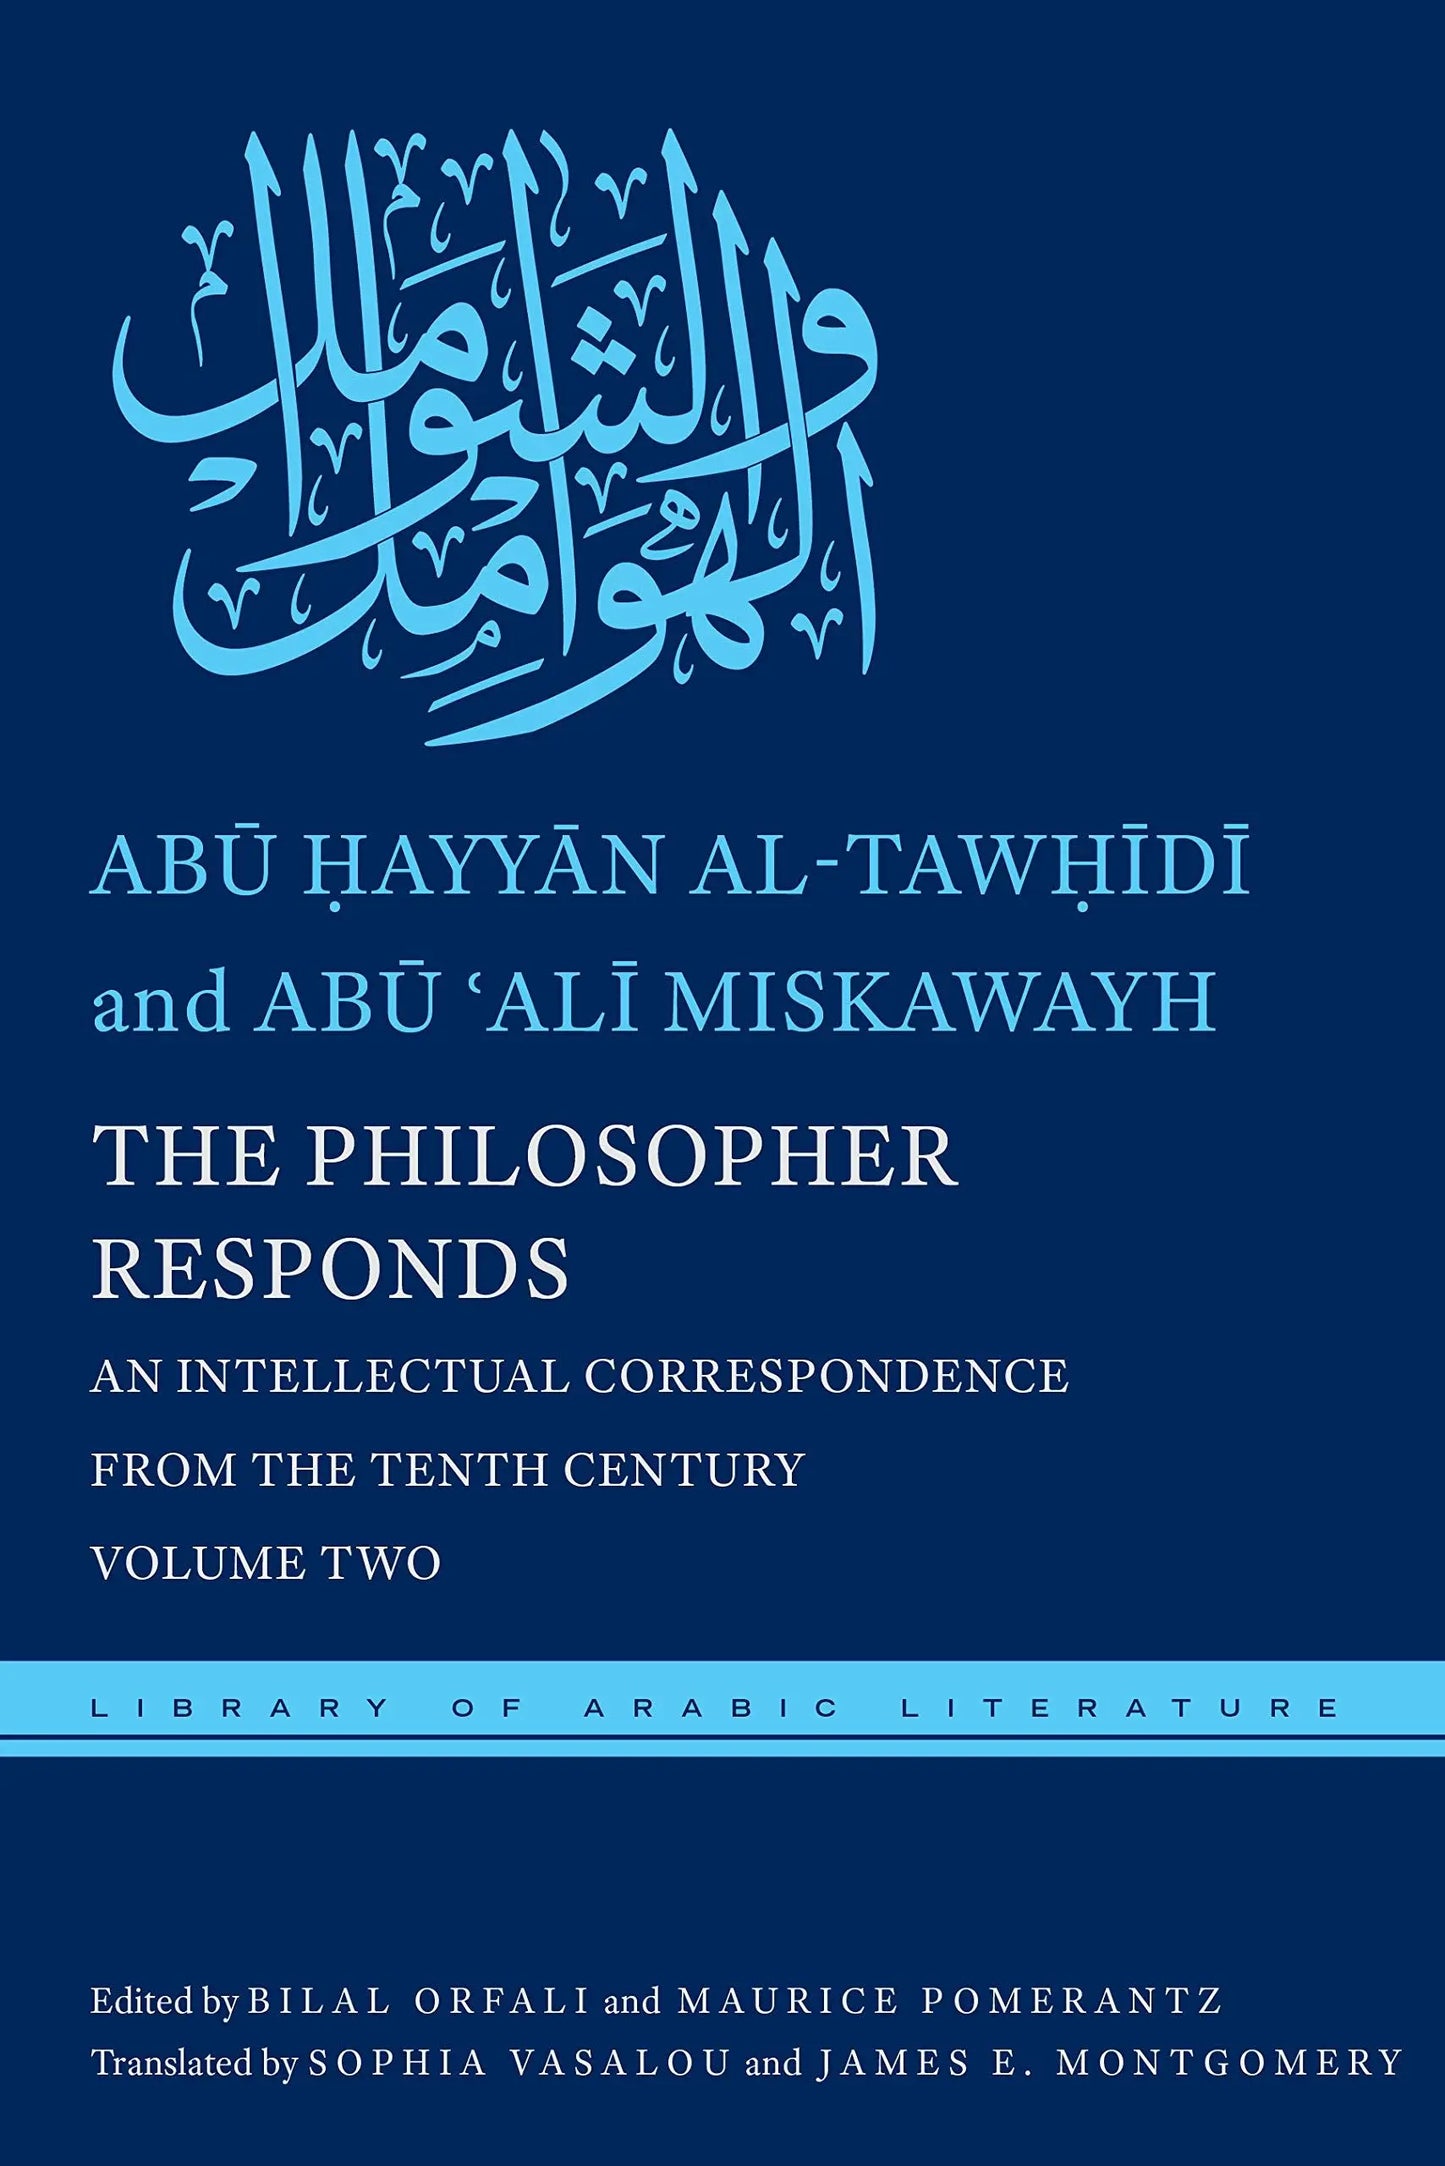 The Philosopher Responds: An Intellectual Correspondence from the Tenth Century - Volume Two